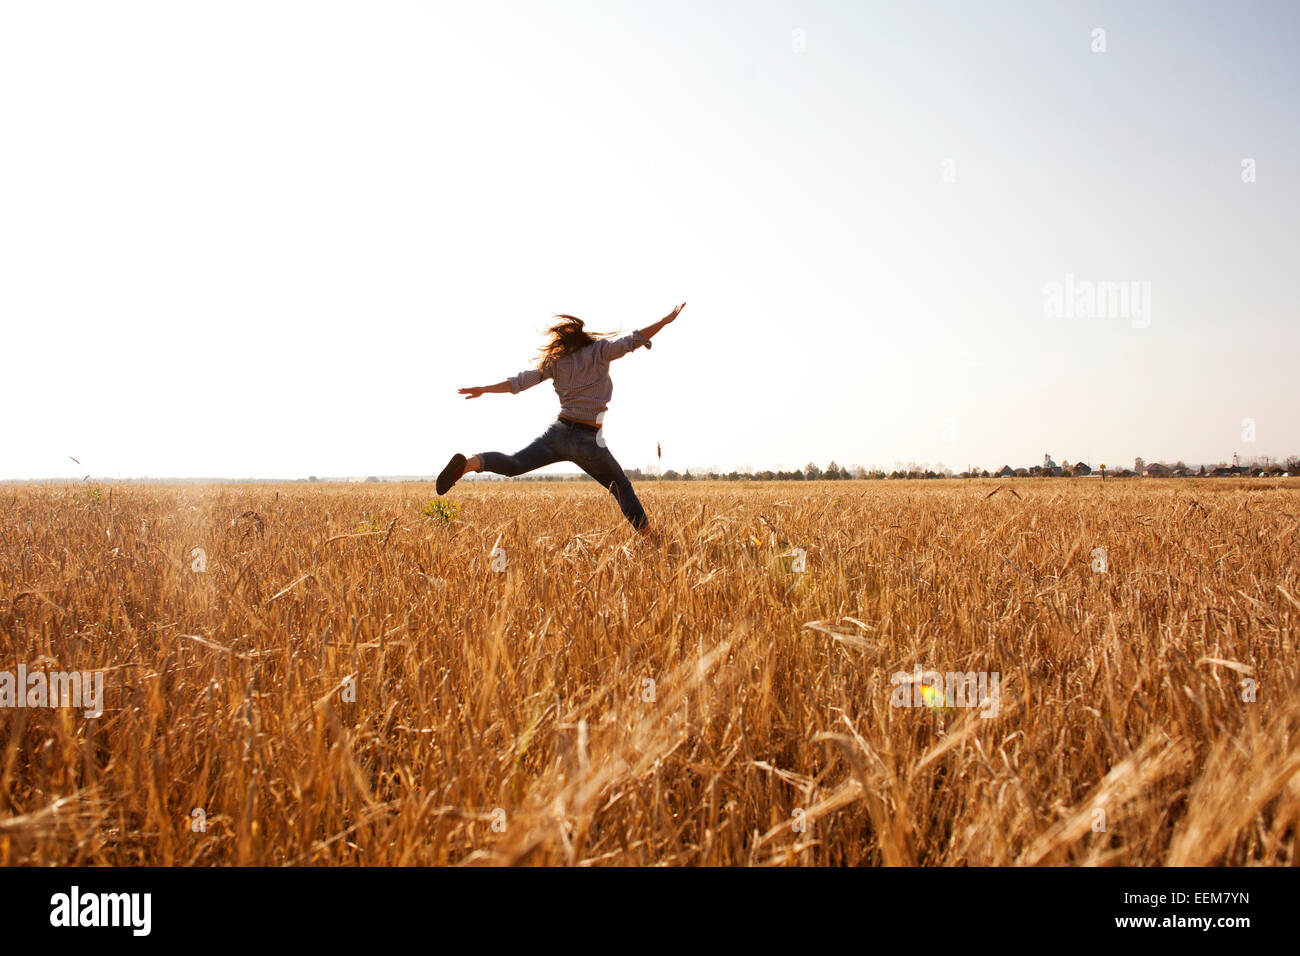 Caucasian woman jumping for joy in rural field Banque D'Images